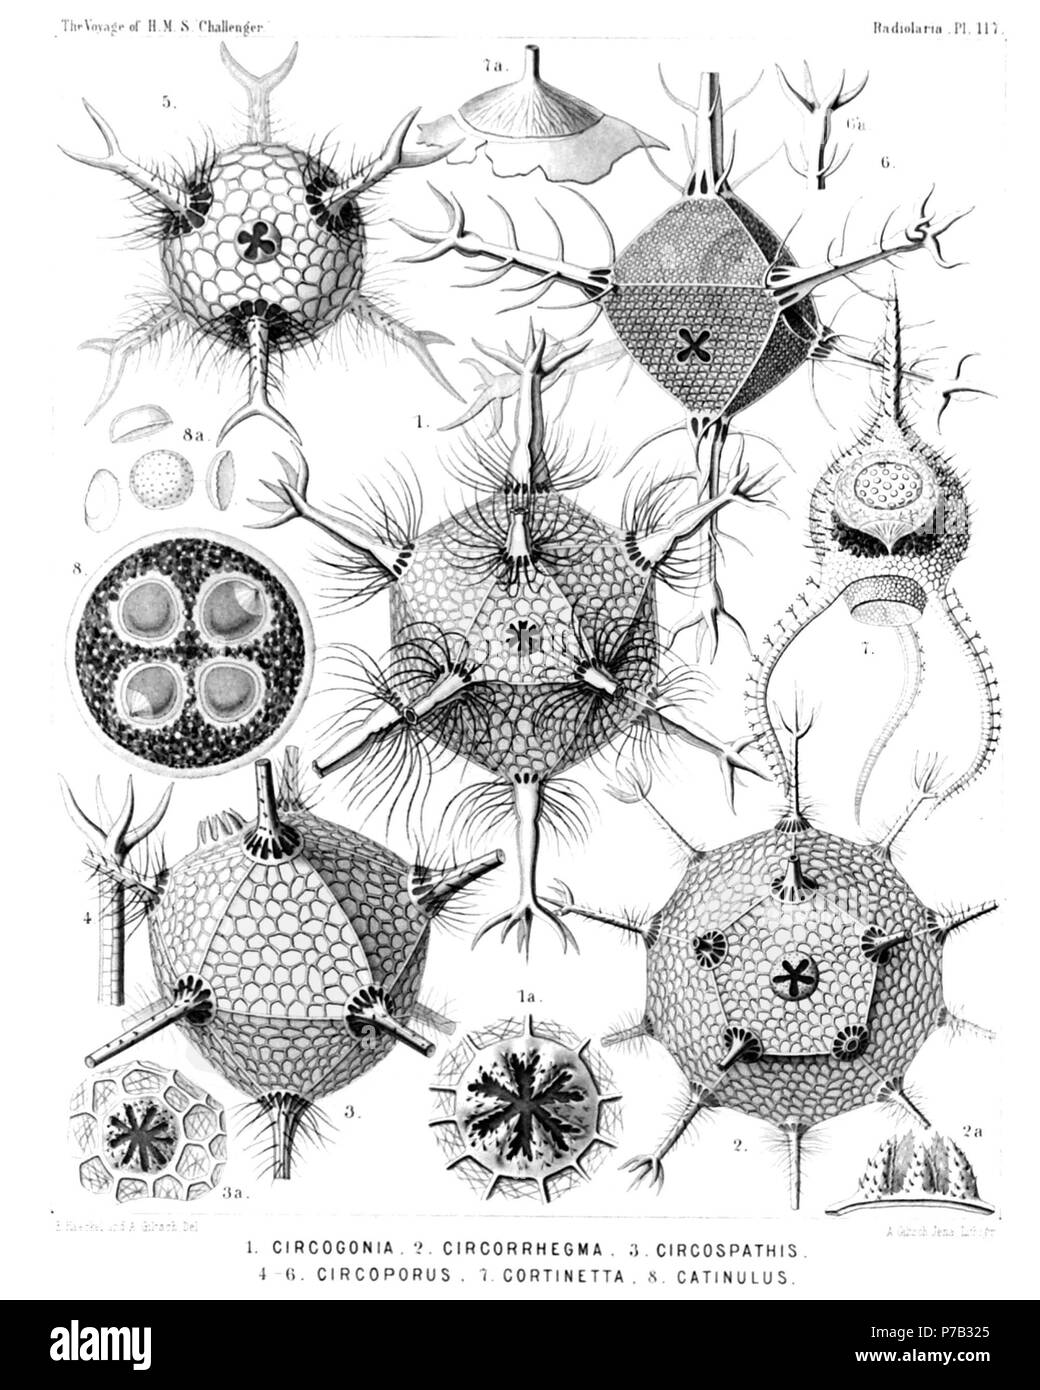 English: Illustration from Report on the Radiolaria collected by H.M.S. Challenger during the years 1873-1876. Part III. Original description follows:  Plate 116. Medusettida et Circoporida.  Diam.  Fig. 1. Polypetta mammillata, n. sp., × 500  In the upper part of the figure the dentate proboscis.  Fig. 1a. Vertical section through the shell-wall, showing two of the hollow alveoles, opening on its inside, × 1000  Fig. 2. Polypetta tabulata, n. sp., × 500  In the upper part of the figure the dentate proboscis.  Fig. 2a. A piece of the shell, seen from the surface, with the triangular plates, ×  Stock Photo